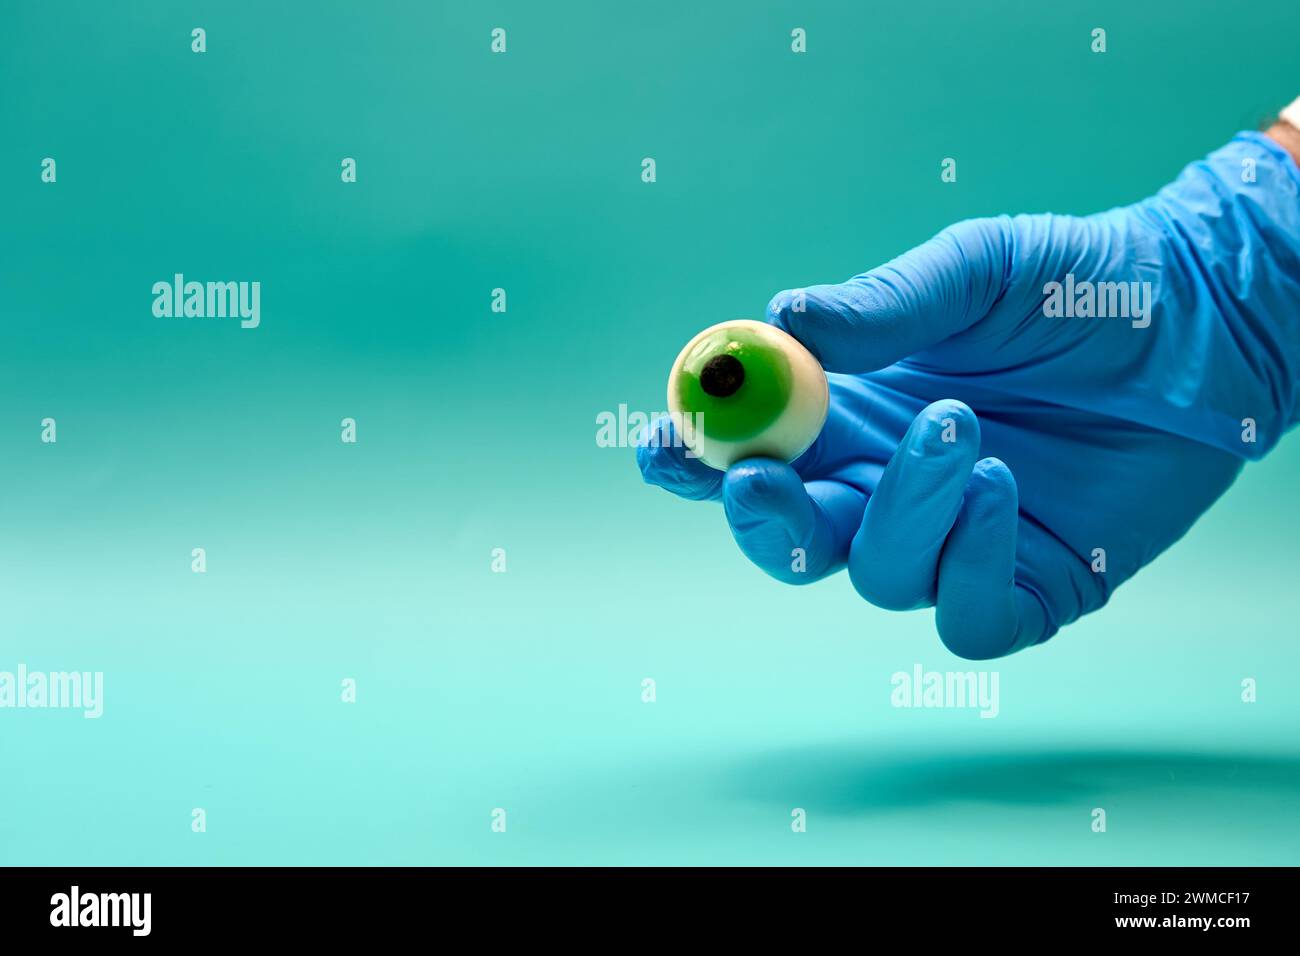 Hand of unrecognizable eye doctor in blue latex glove showing green artificial eyeball against mint green background Stock Photo